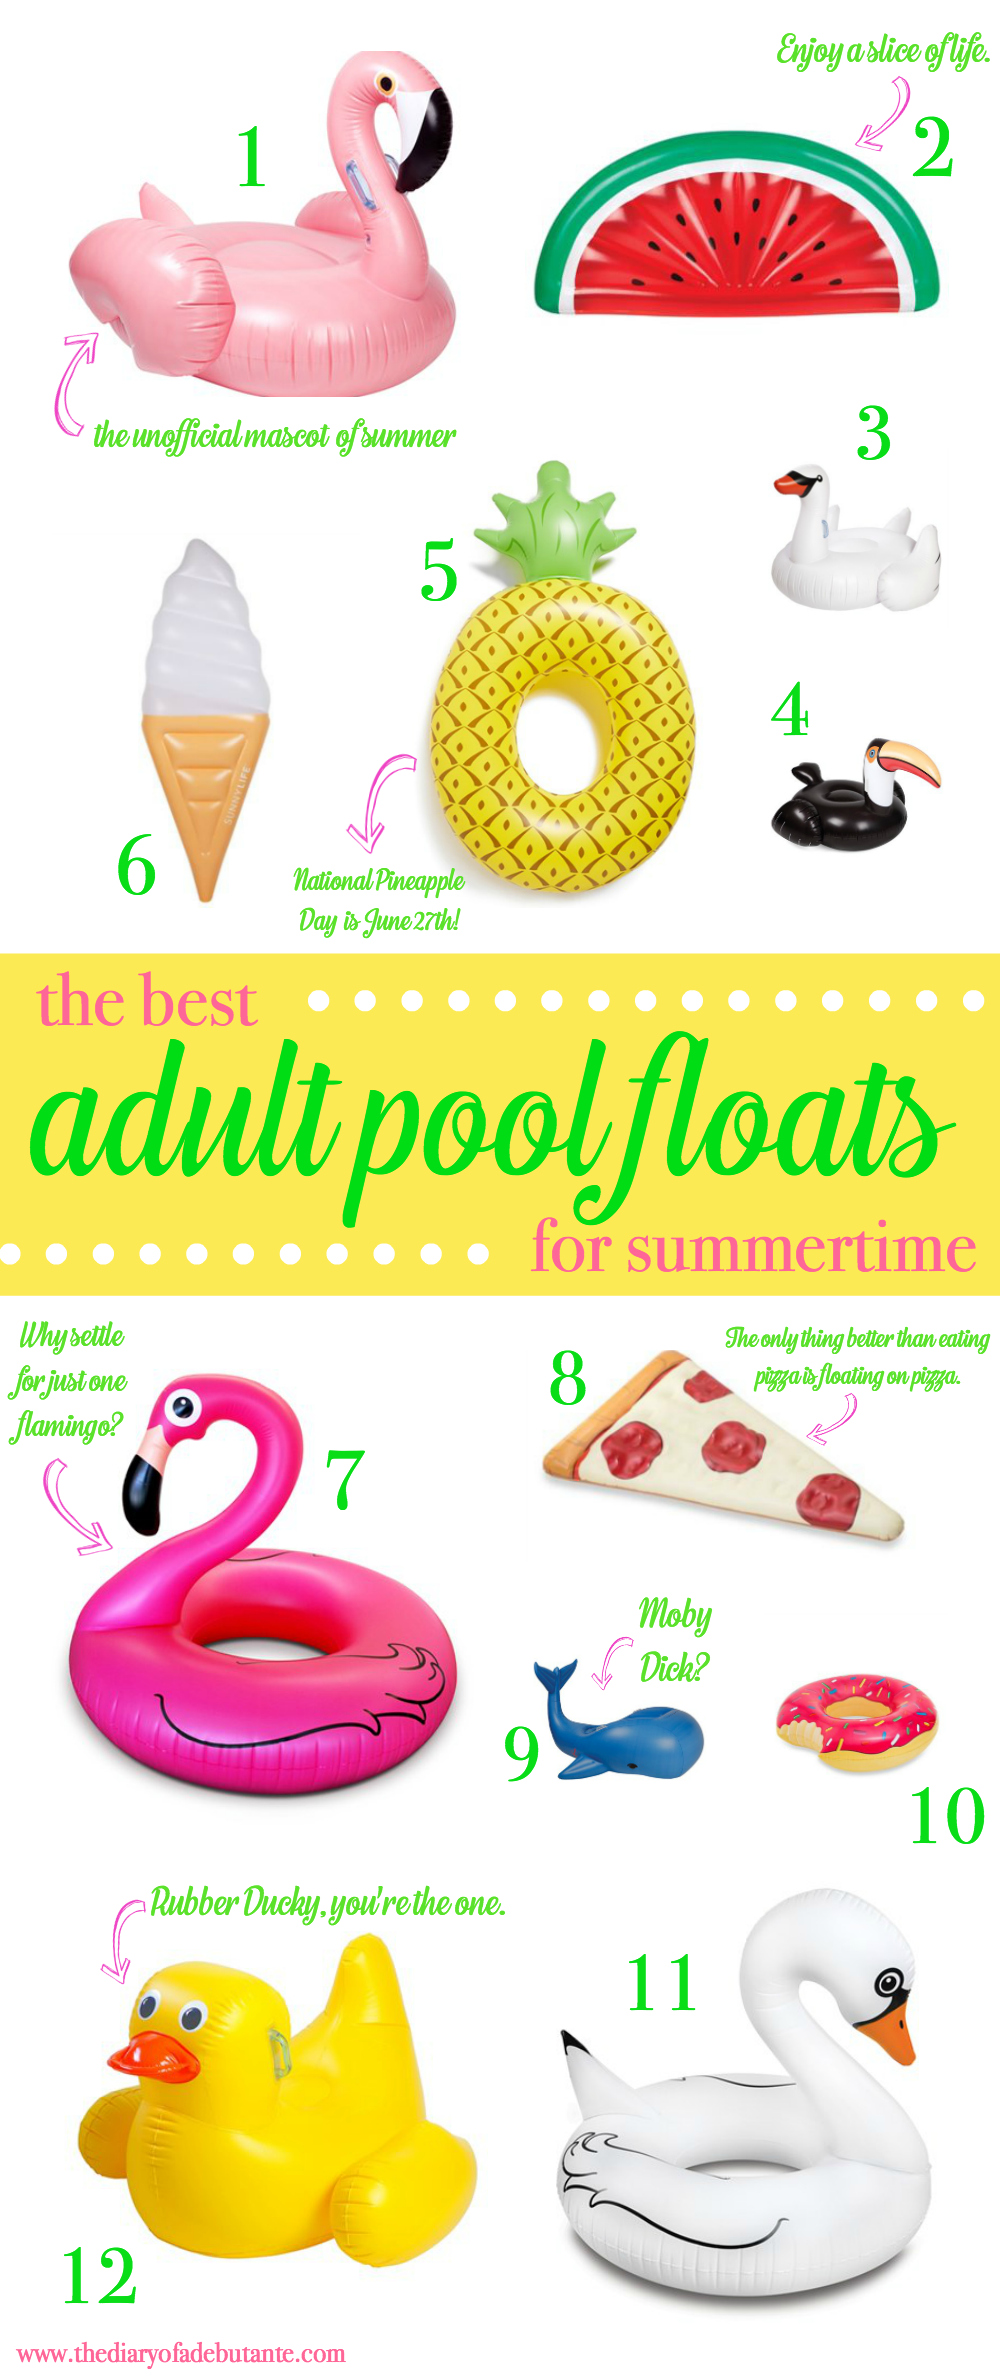 Adult Pool Floats, Summer Pool Floats, Pool Floats, Summer Accessories, Stephanie Ziajka, Diary of a Debutante